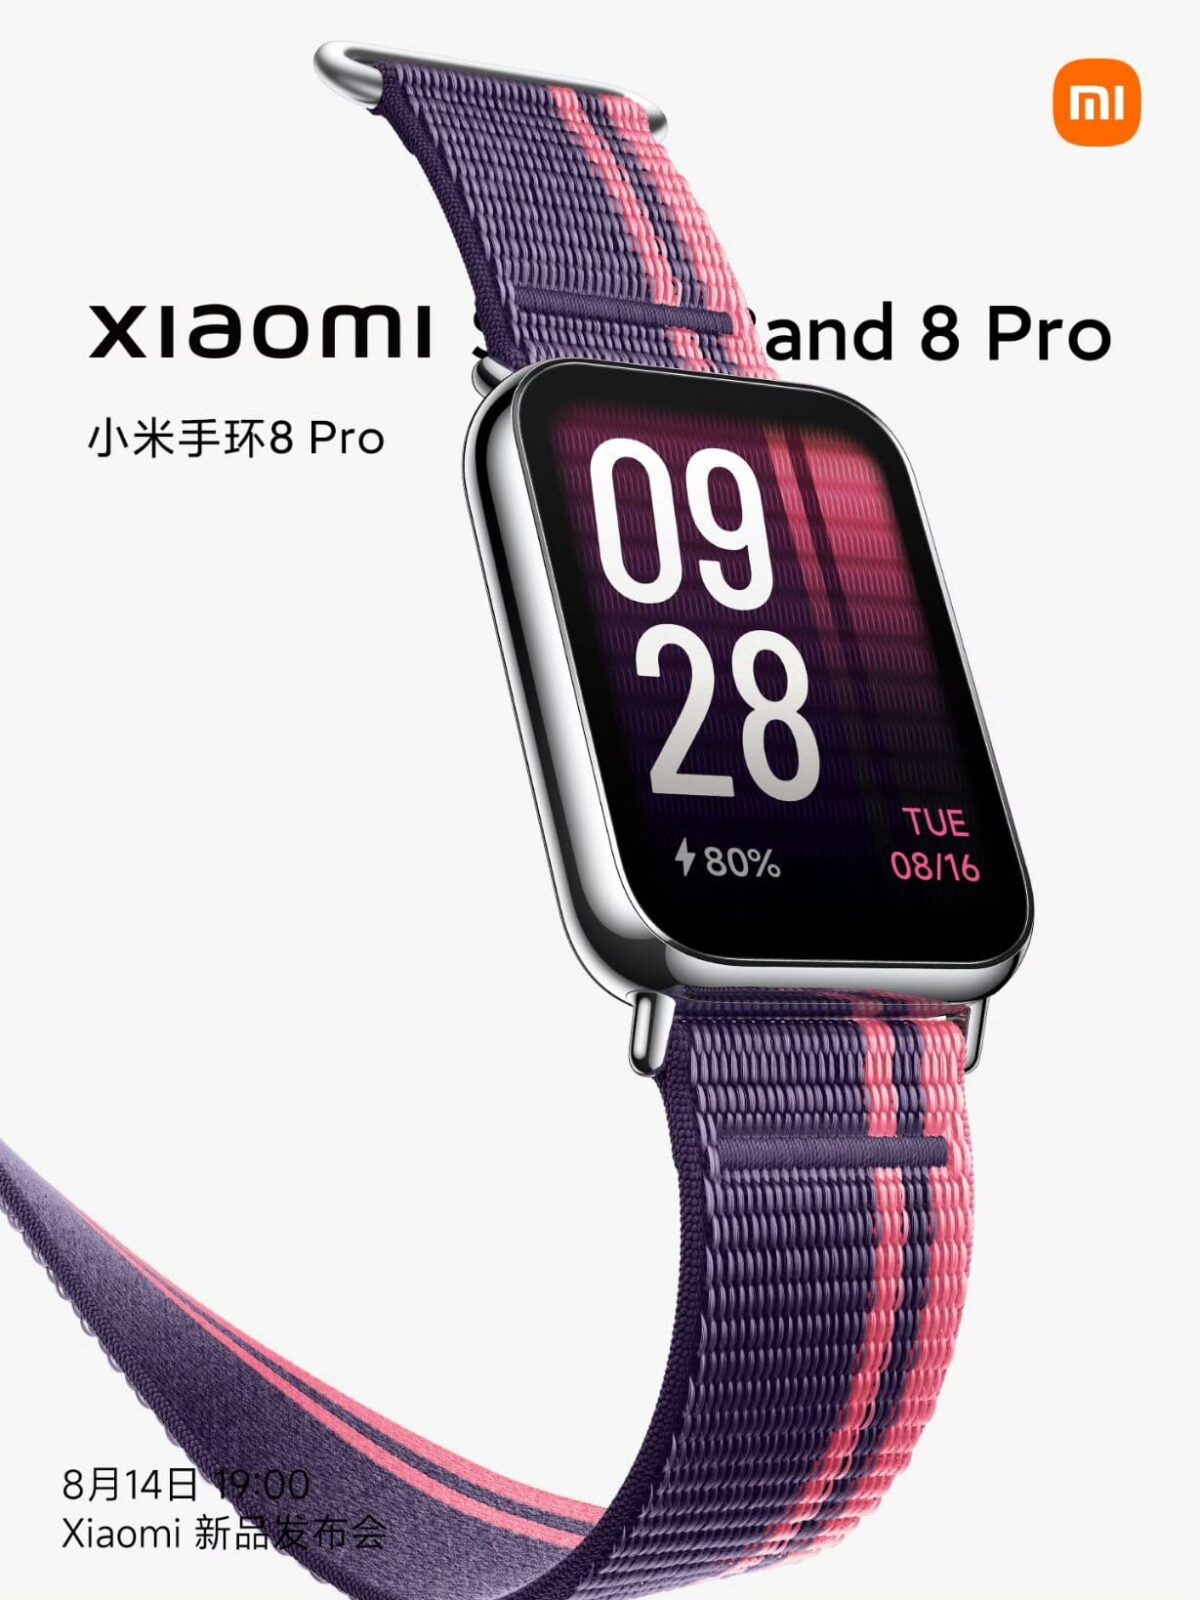 Xiaomi has unveiled the global version of its Smart Band 8 Pro